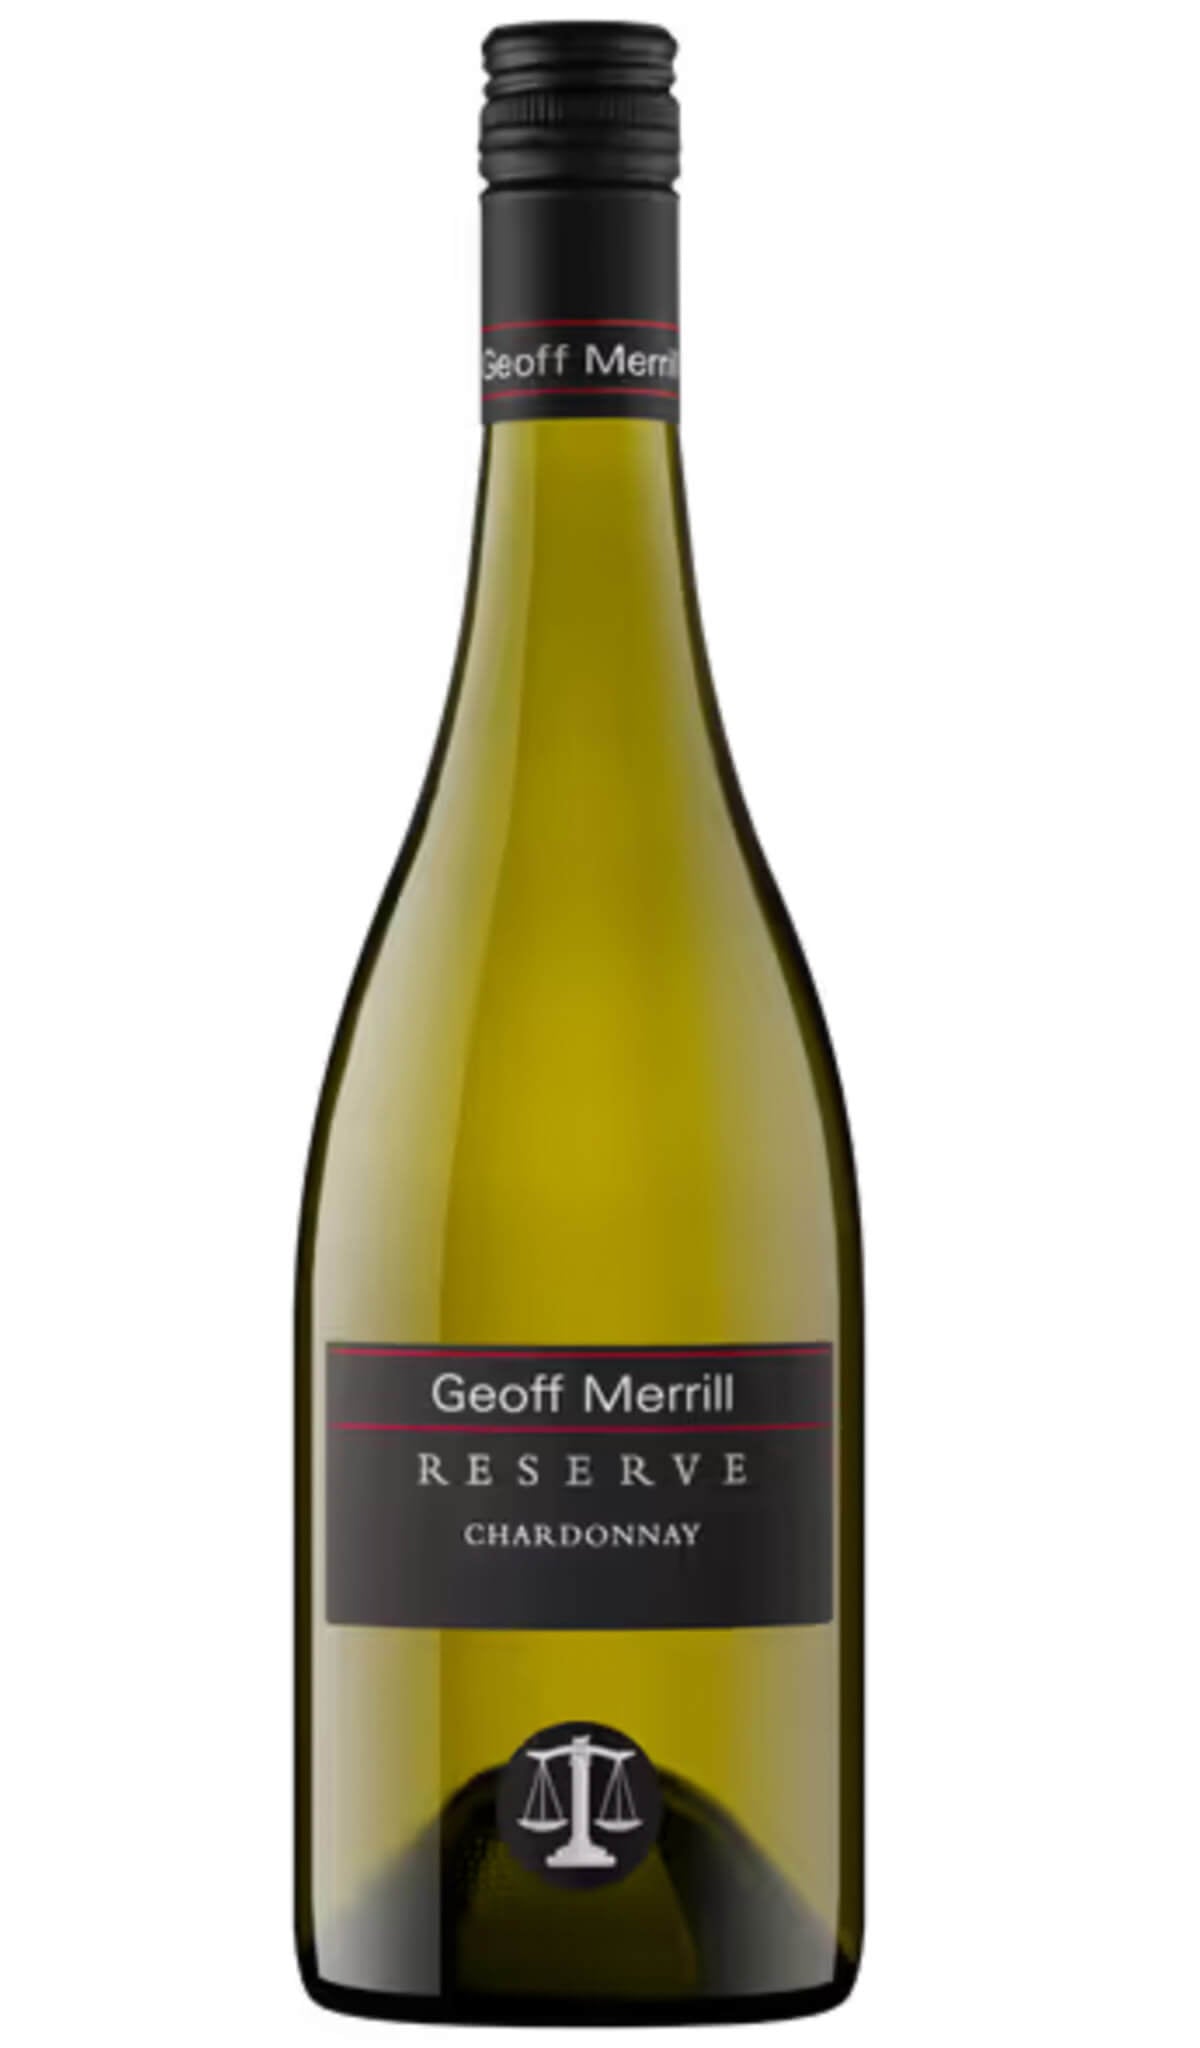 Find out more, explore the range and purchase Geoff Merril Reserve Chardonnay 2018 (Coonawarra, McLaren Vale) available online at Wine Sellers Direct - Australia's independent liquor specialists.